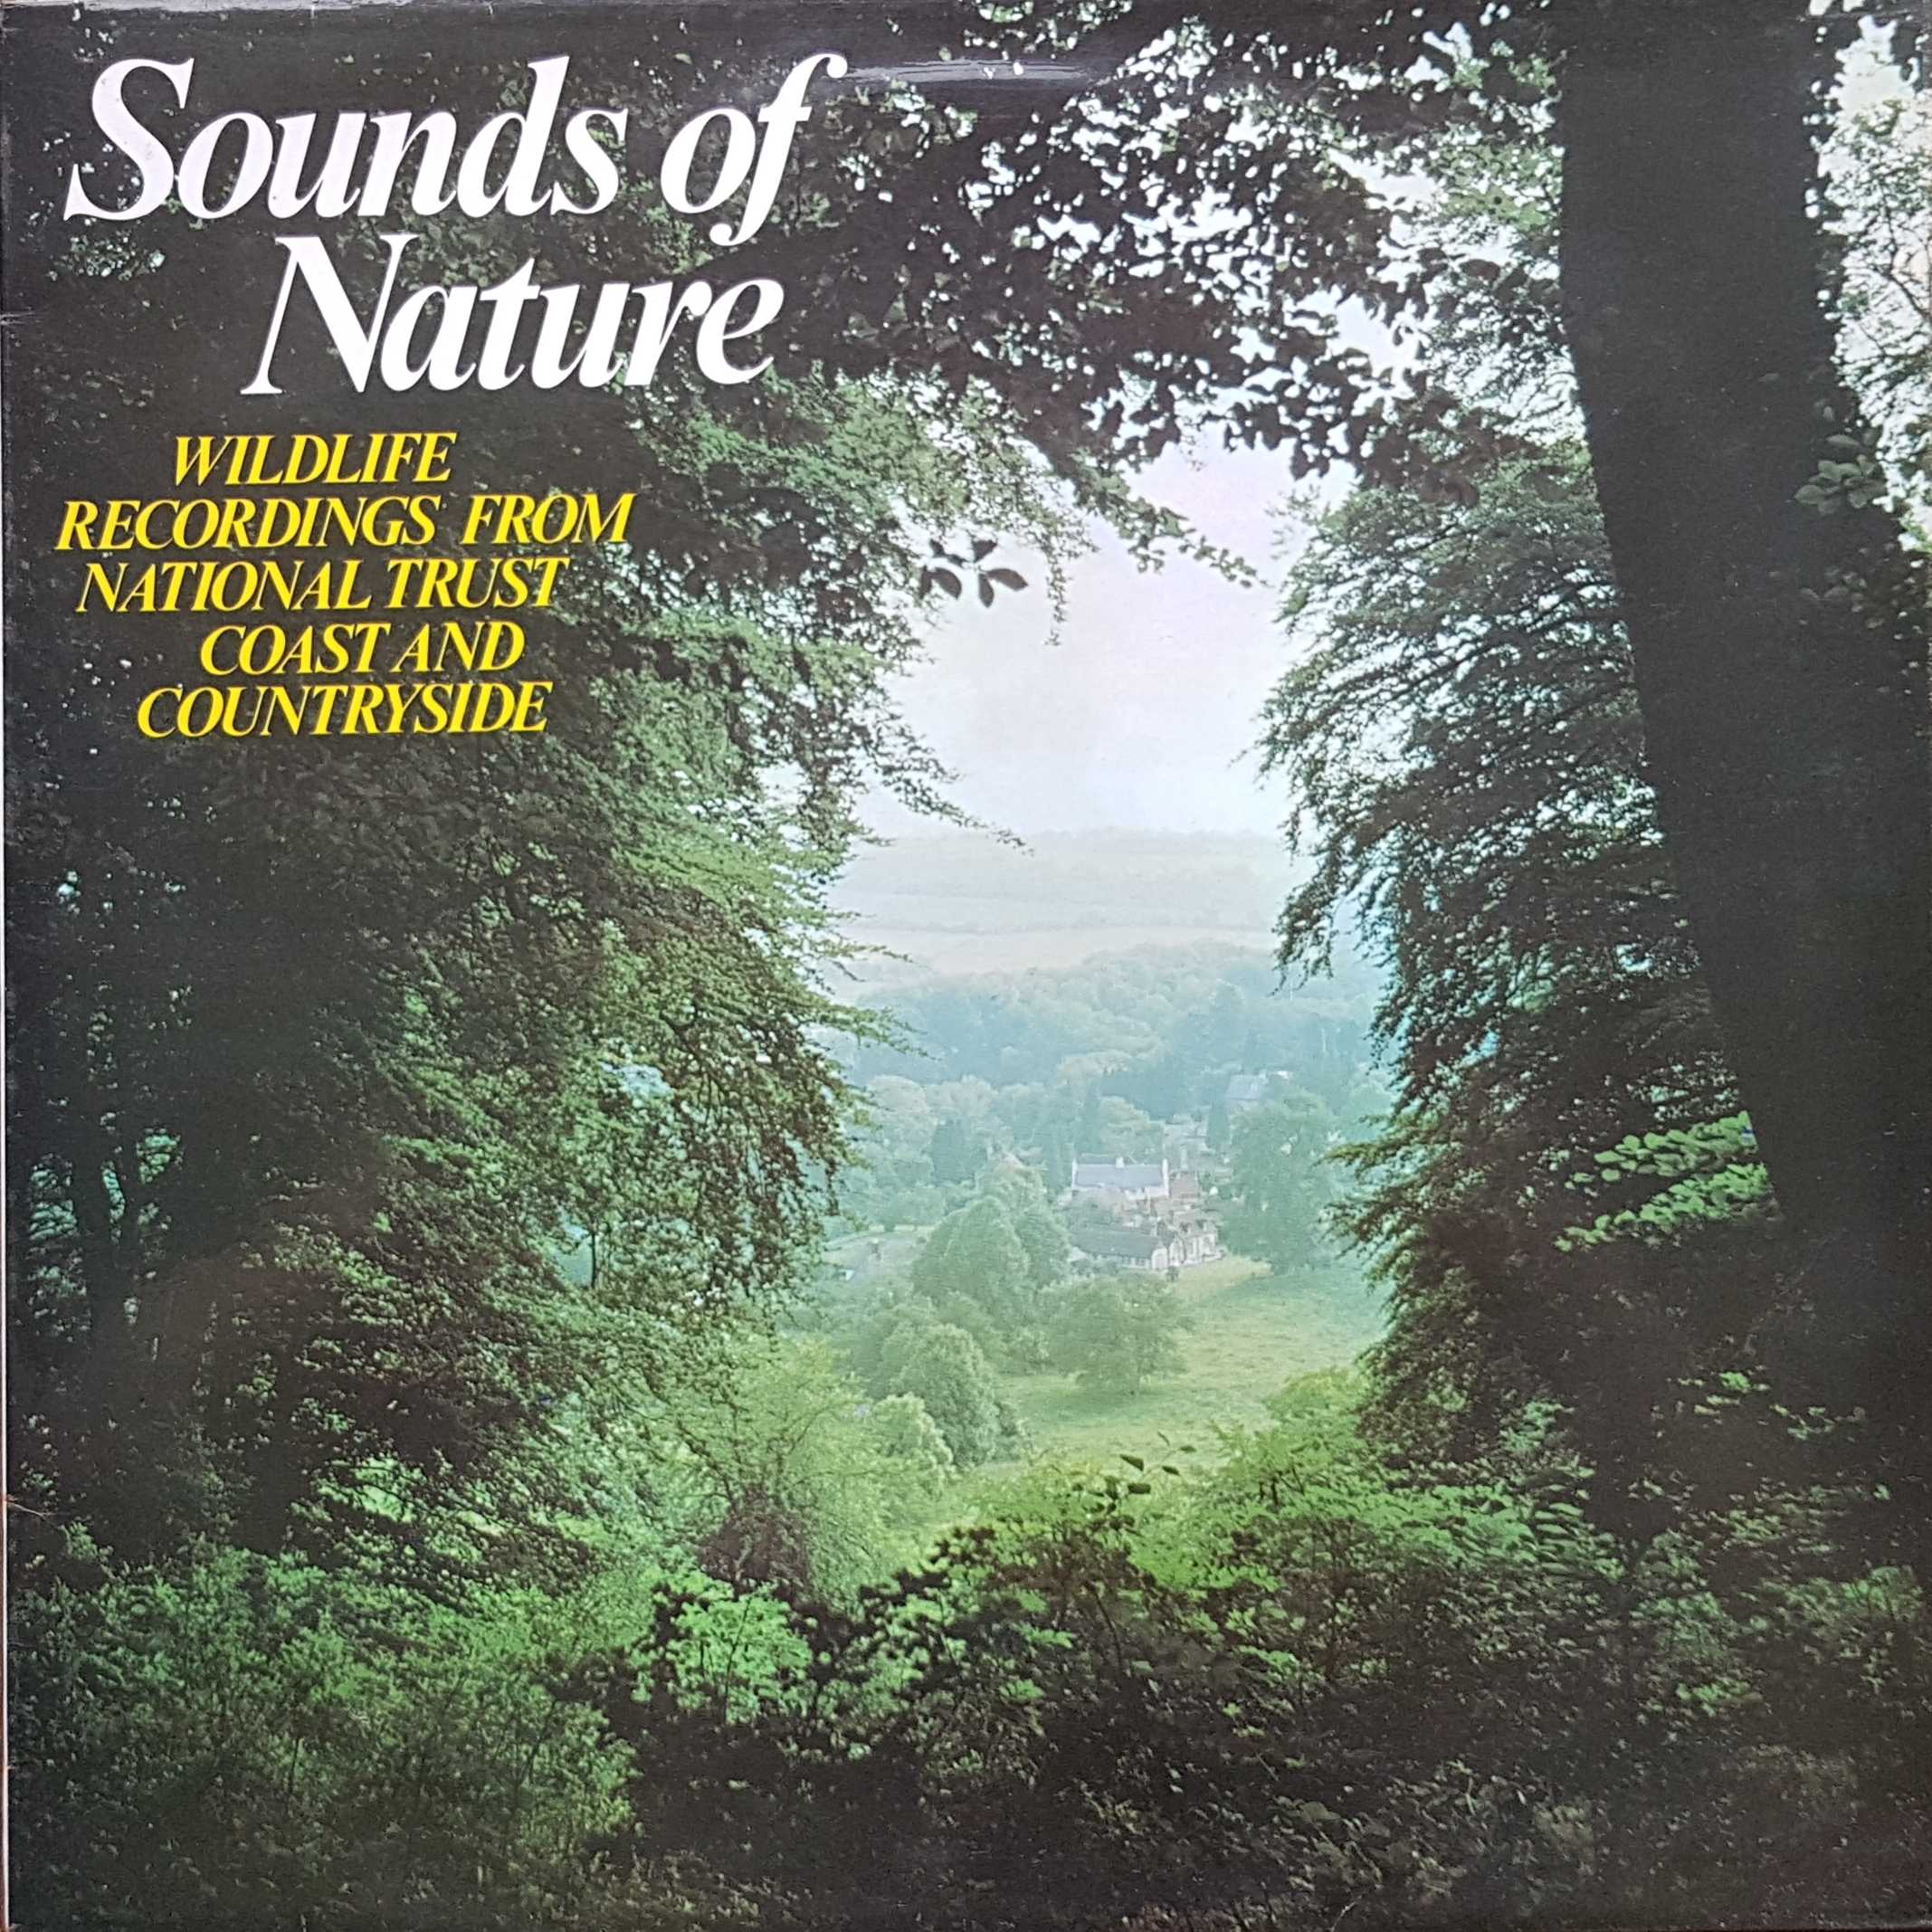 Picture of RE 145 Sounds of nature by artist Eric Simms from the BBC albums - Records and Tapes library